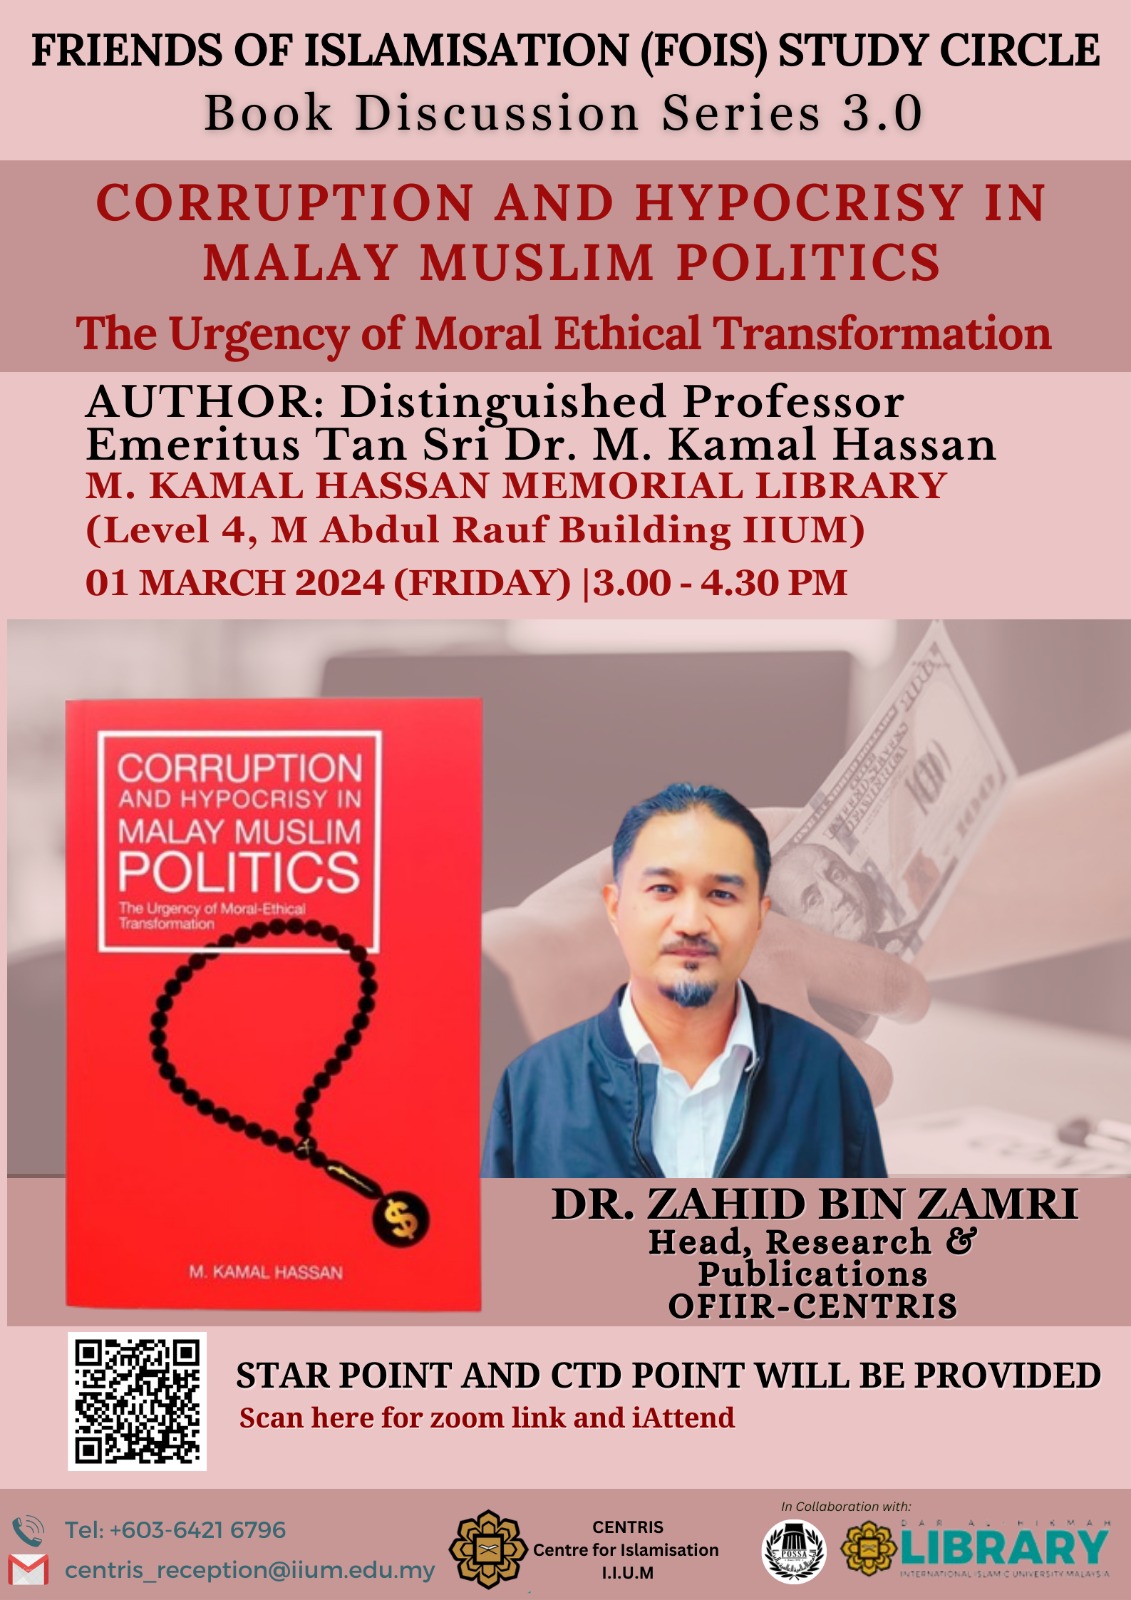 CORRUPTION AND HYPOCRISY IN MALAY MUSLIM POLITICS - The Urgency of Moral Ethical Transformation